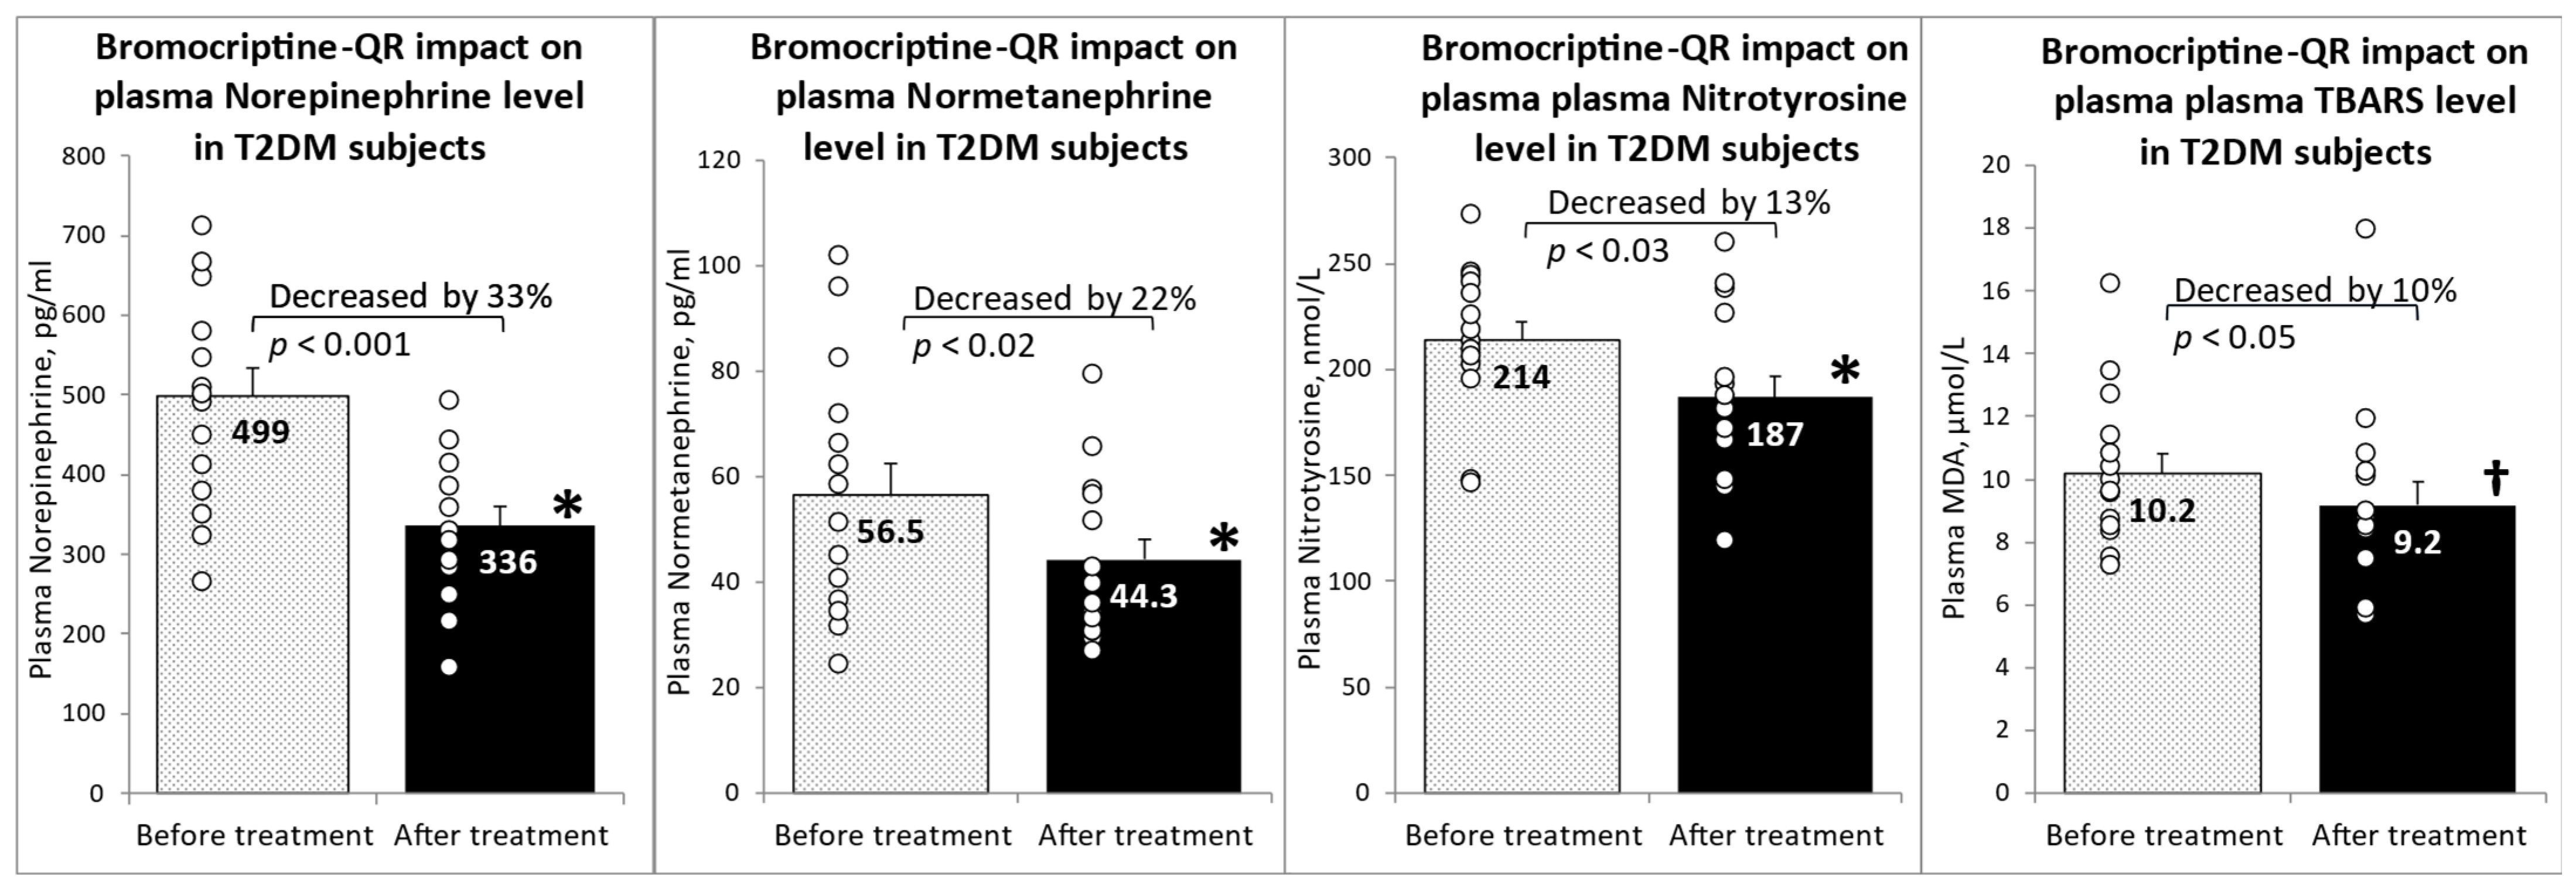 IJMS | Free Full-Text | Bromocriptine-QR Therapy Reduces Sympathetic Tone  and Ameliorates a Pro-Oxidative/Pro-Inflammatory Phenotype in Peripheral  Blood Mononuclear Cells and Plasma of Type 2 Diabetes Subjects